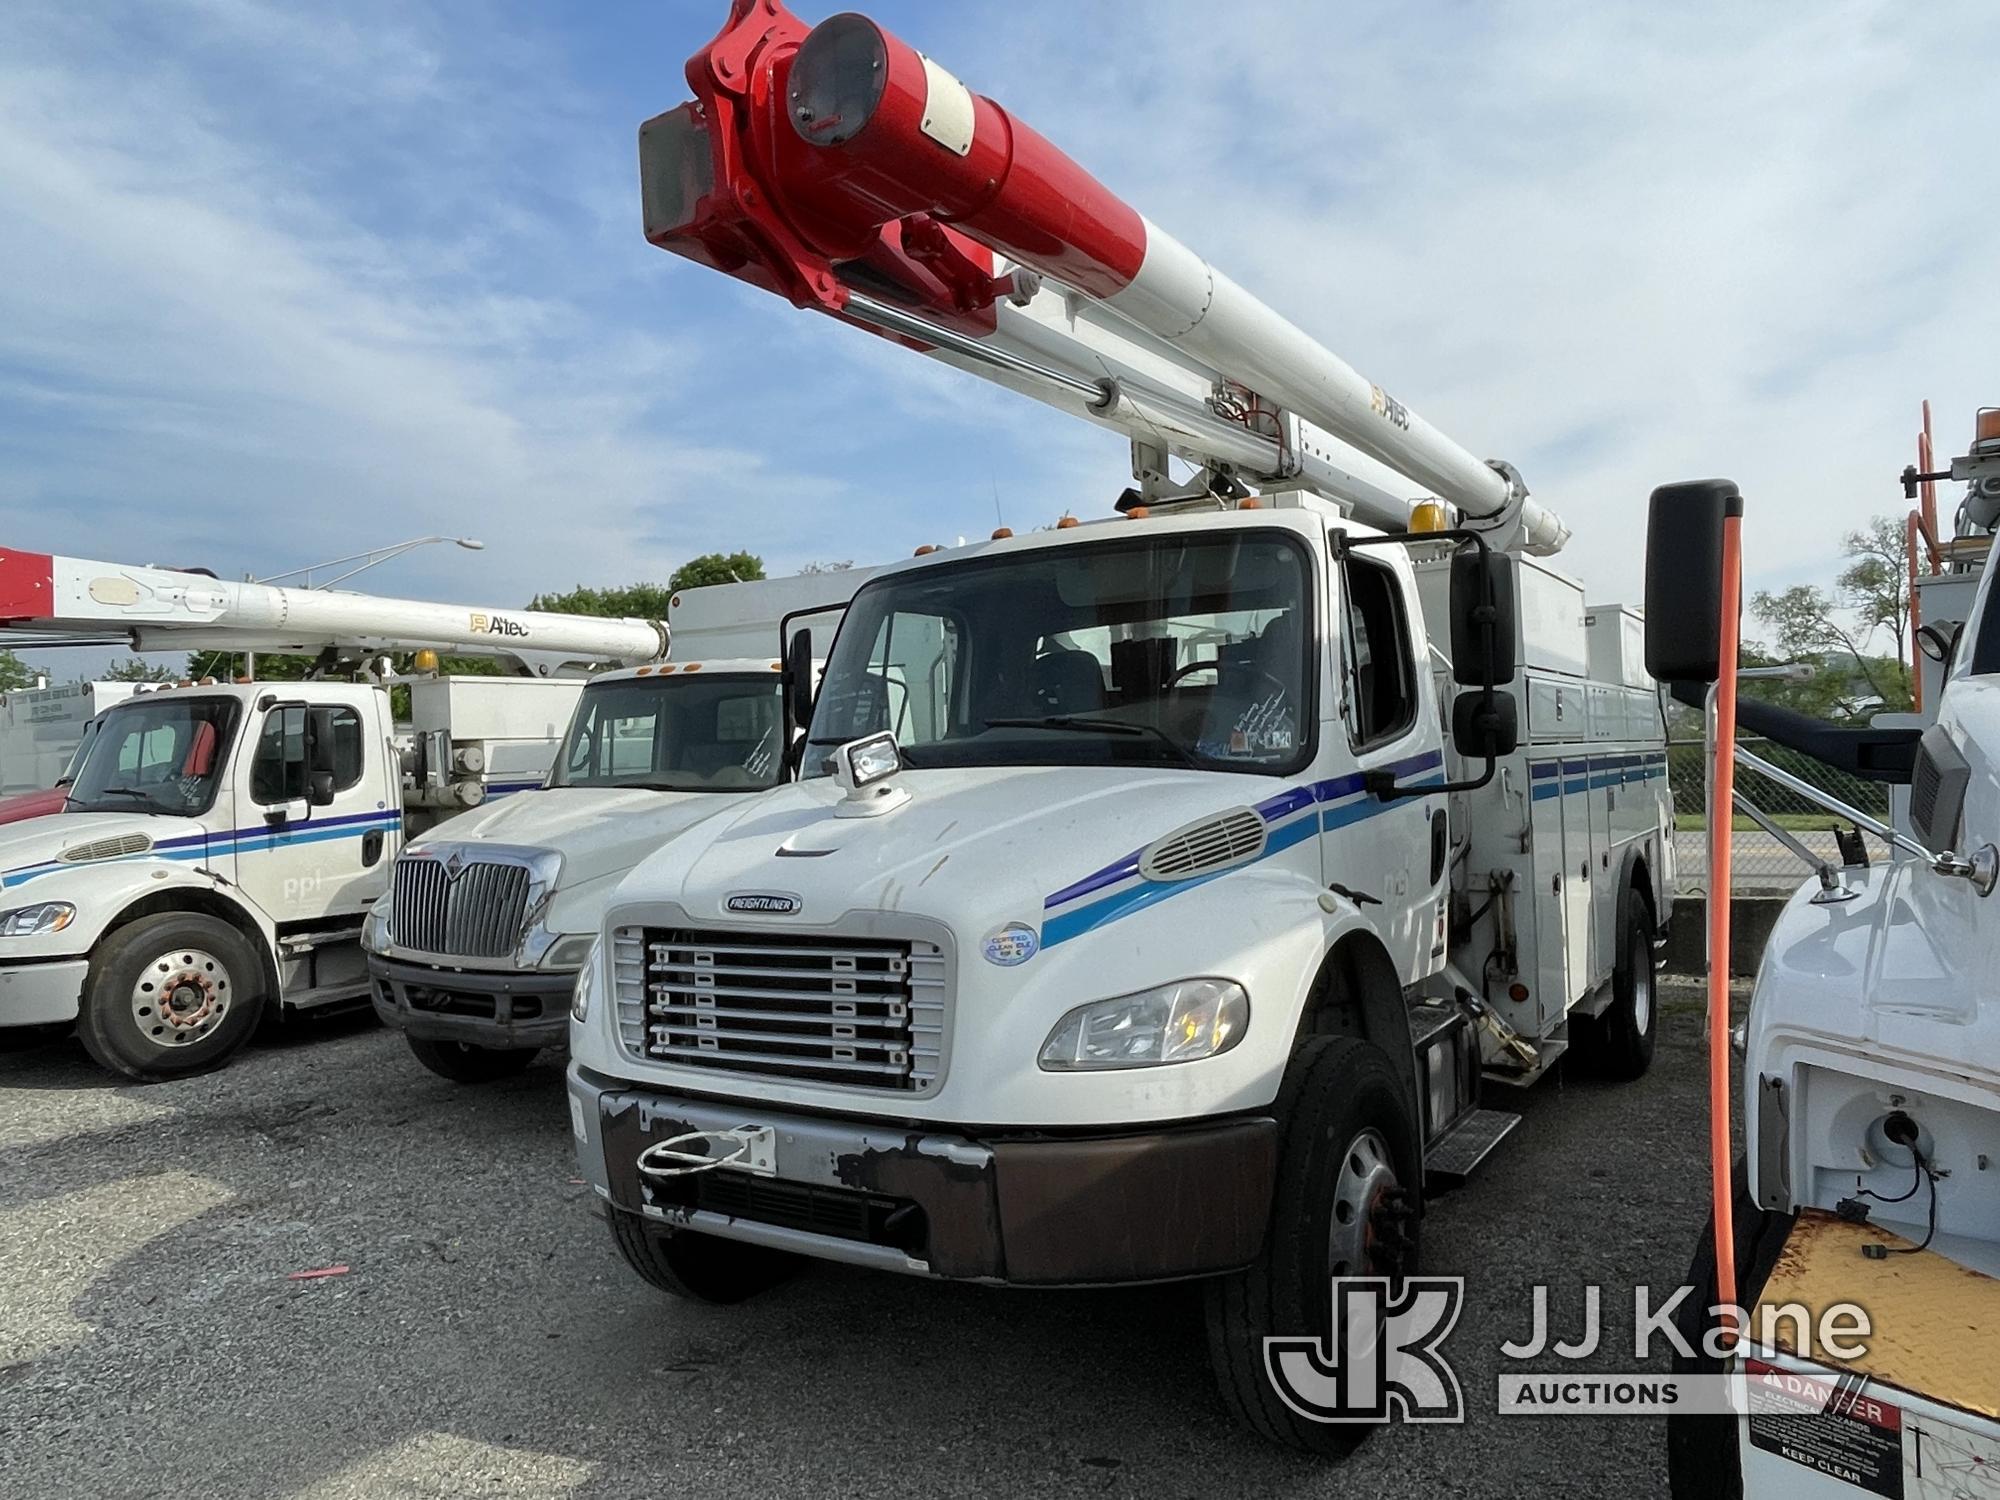 (Plymouth Meeting, PA) Altec LRV-55, Over-Center Bucket Truck center mounted on 2011 Freightliner M2